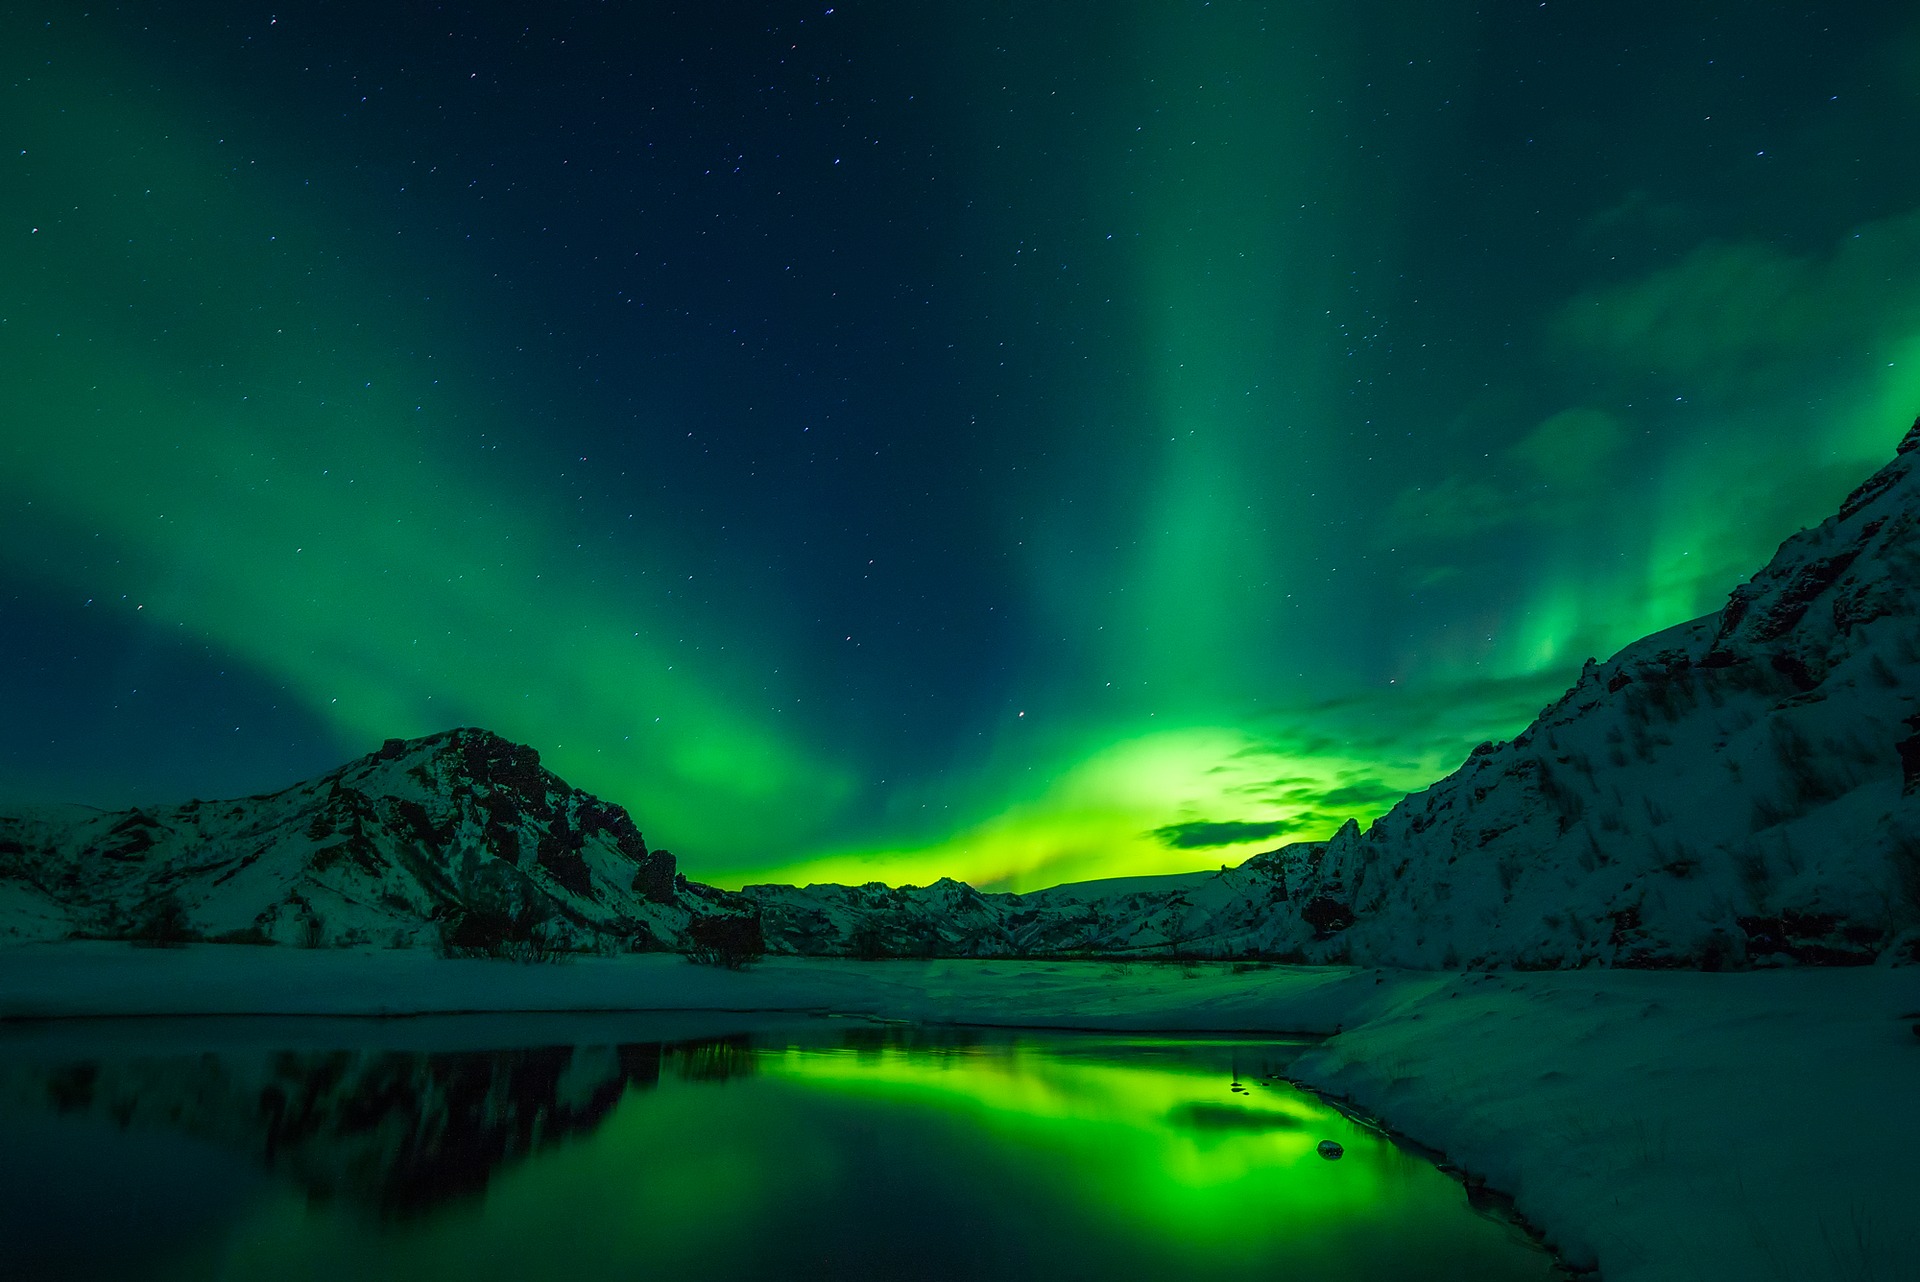 Northern lights above a lake and mountains in Iceland